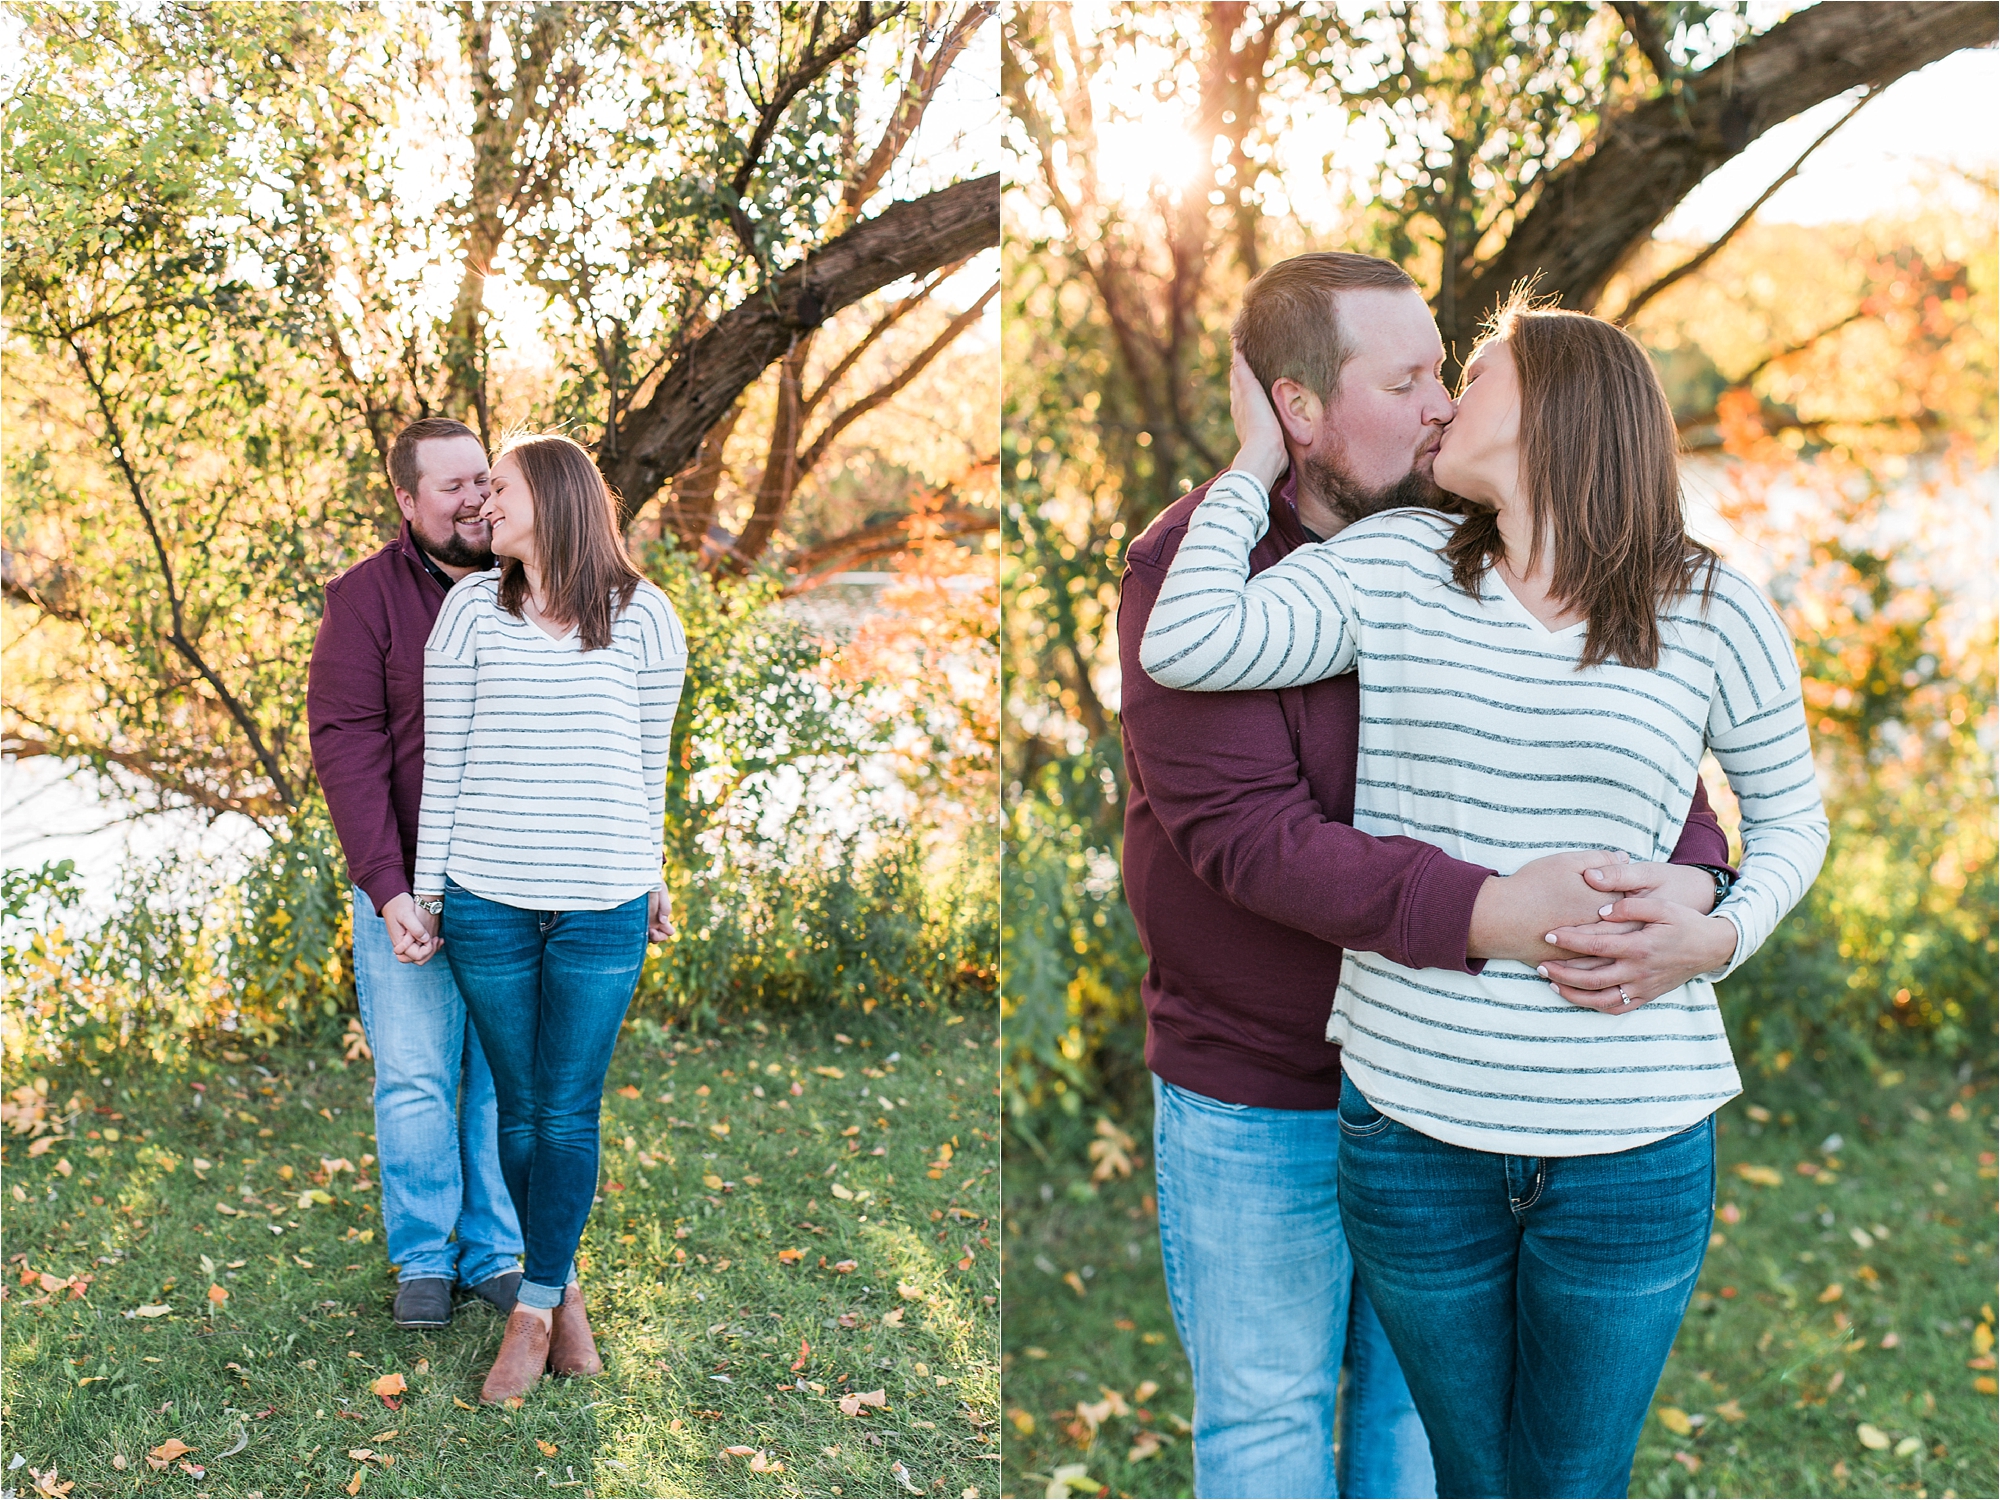 Engaged couple in front of colorful fall treesat Minneapolis Fall engagement session at Boom Island Park in Minneapolis photographed by Mallory Kiesow